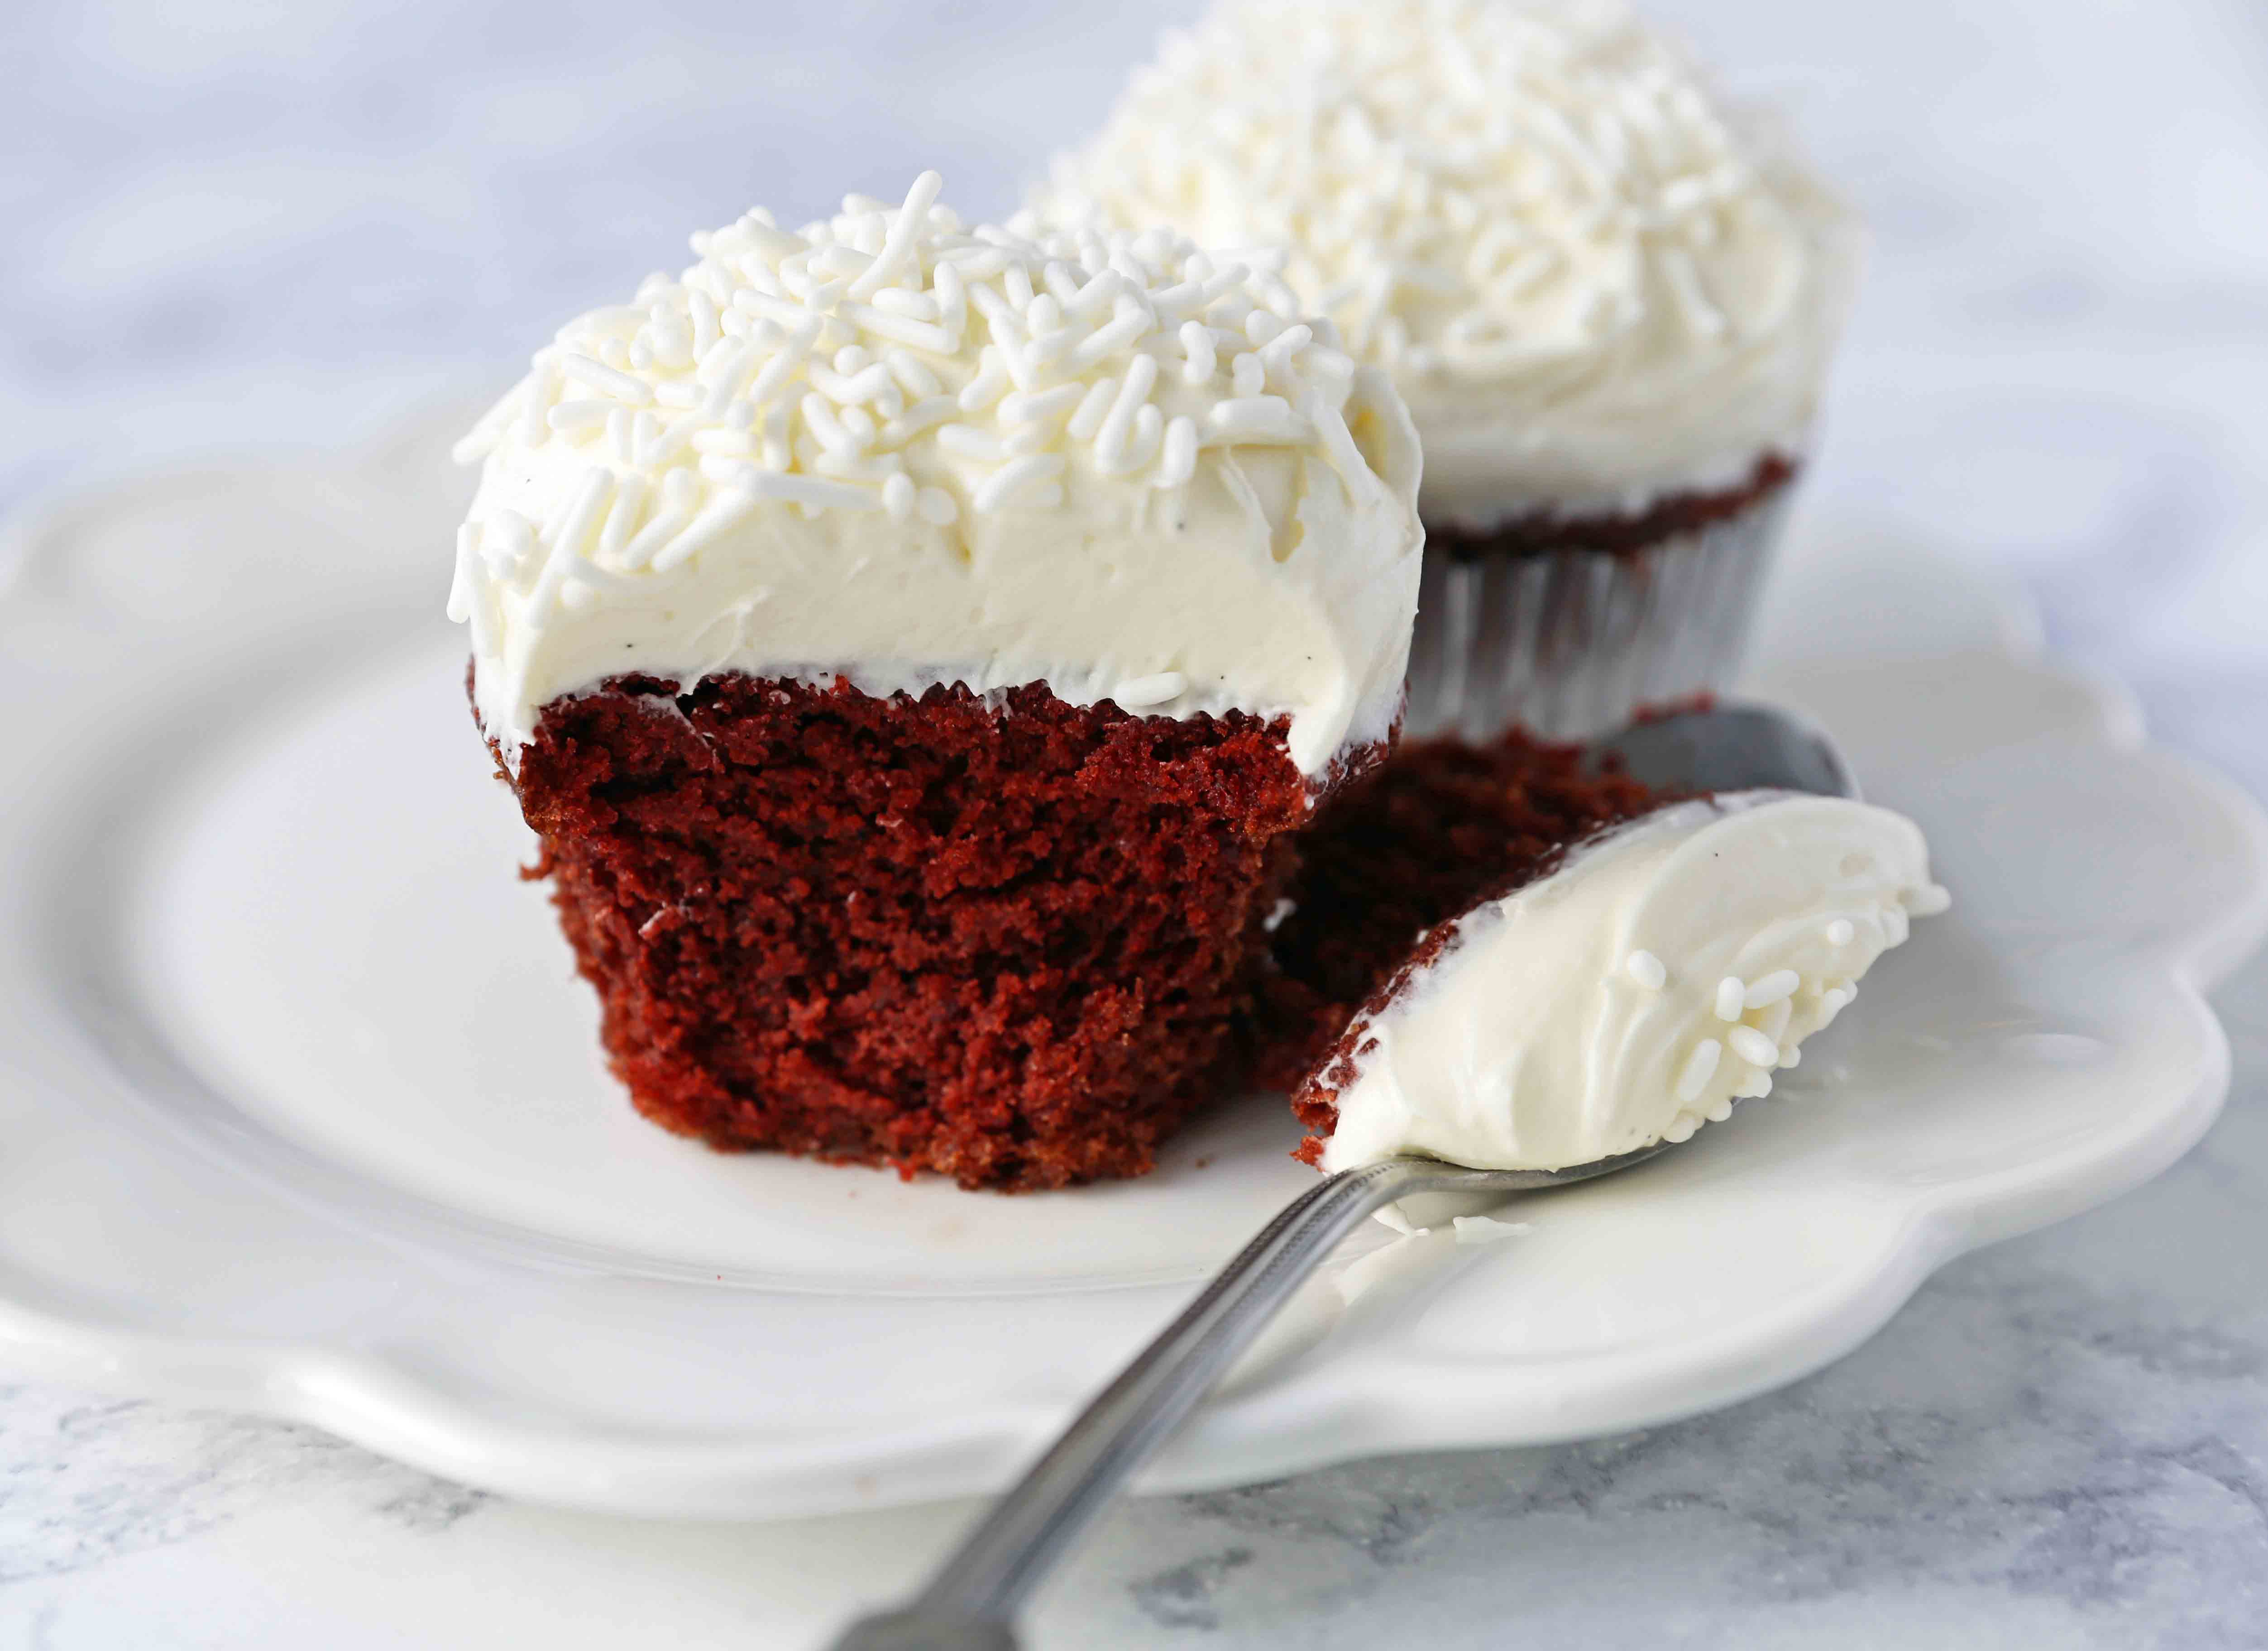 Red Velvet Cupcakes. The Best Red Velvet Cupcake Recipe with Cream Cheese Frosting. All of the tips and tricks for making perfect red velvet cupcakes every single time! www.modernhoney.com #redvelvet #redvelvetcupcakes #redvelvetcupcake 